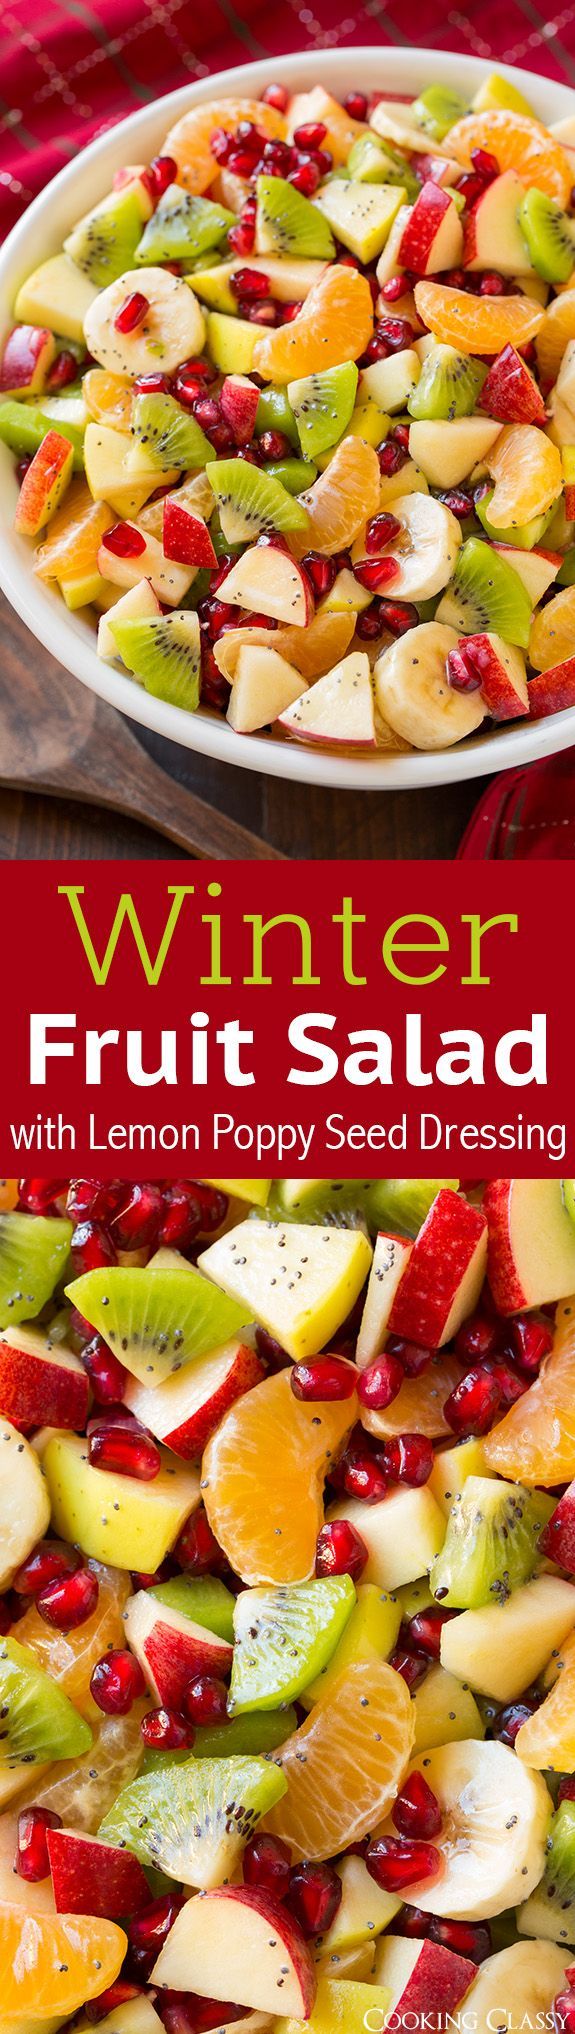 Winter Fruit Salad with Lemon Poppy Seed Dressing – SO GOOD I made it two days in